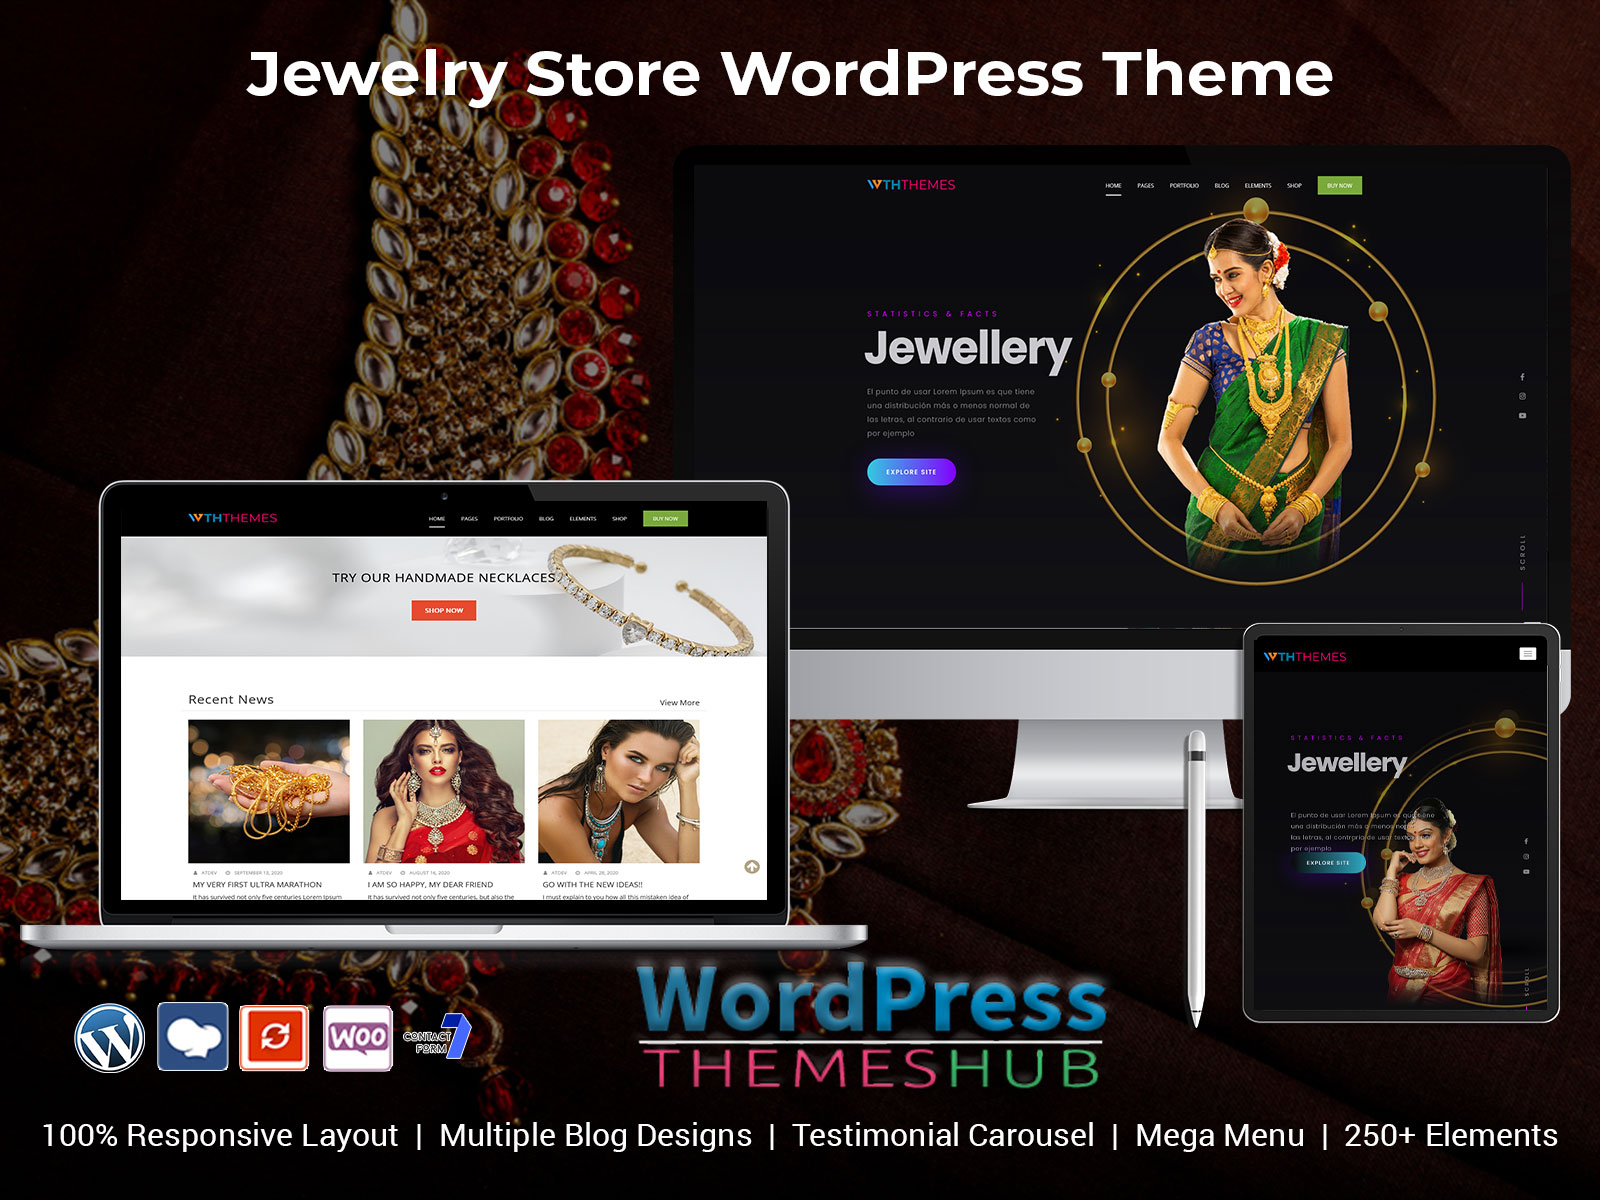 Jewelry WordPress Theme Website For Your Online Store